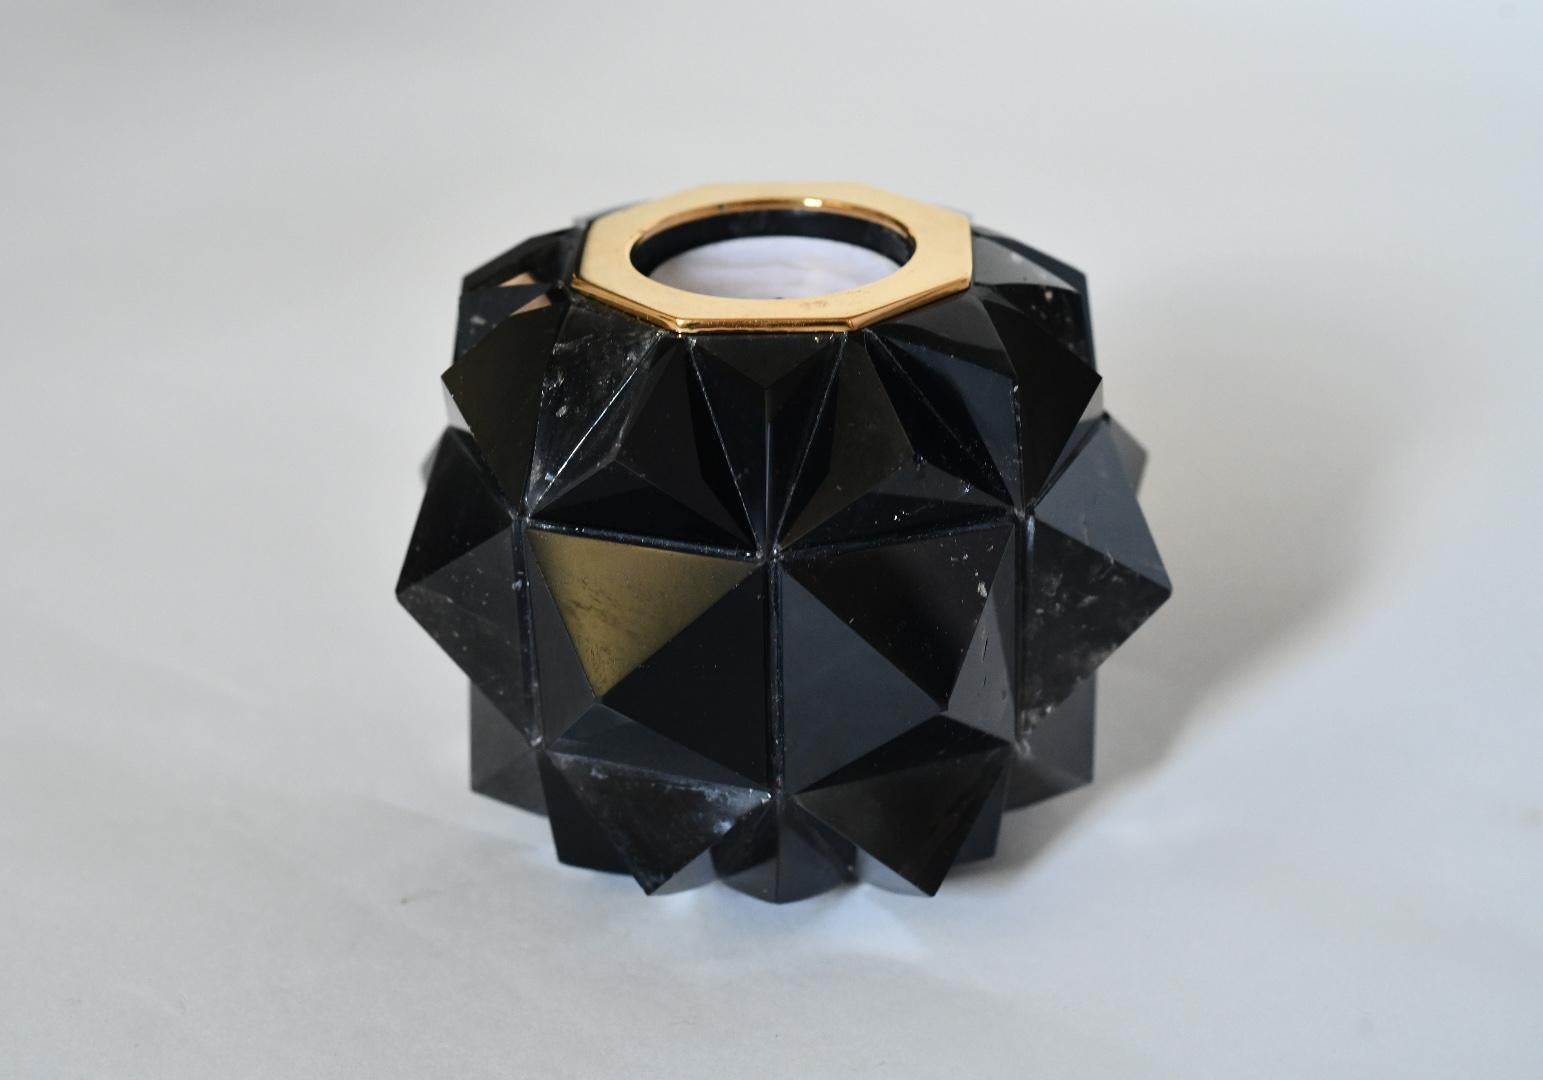 Multifaceted dark rock crystal candleholder. Created by Phoenix Gallery.